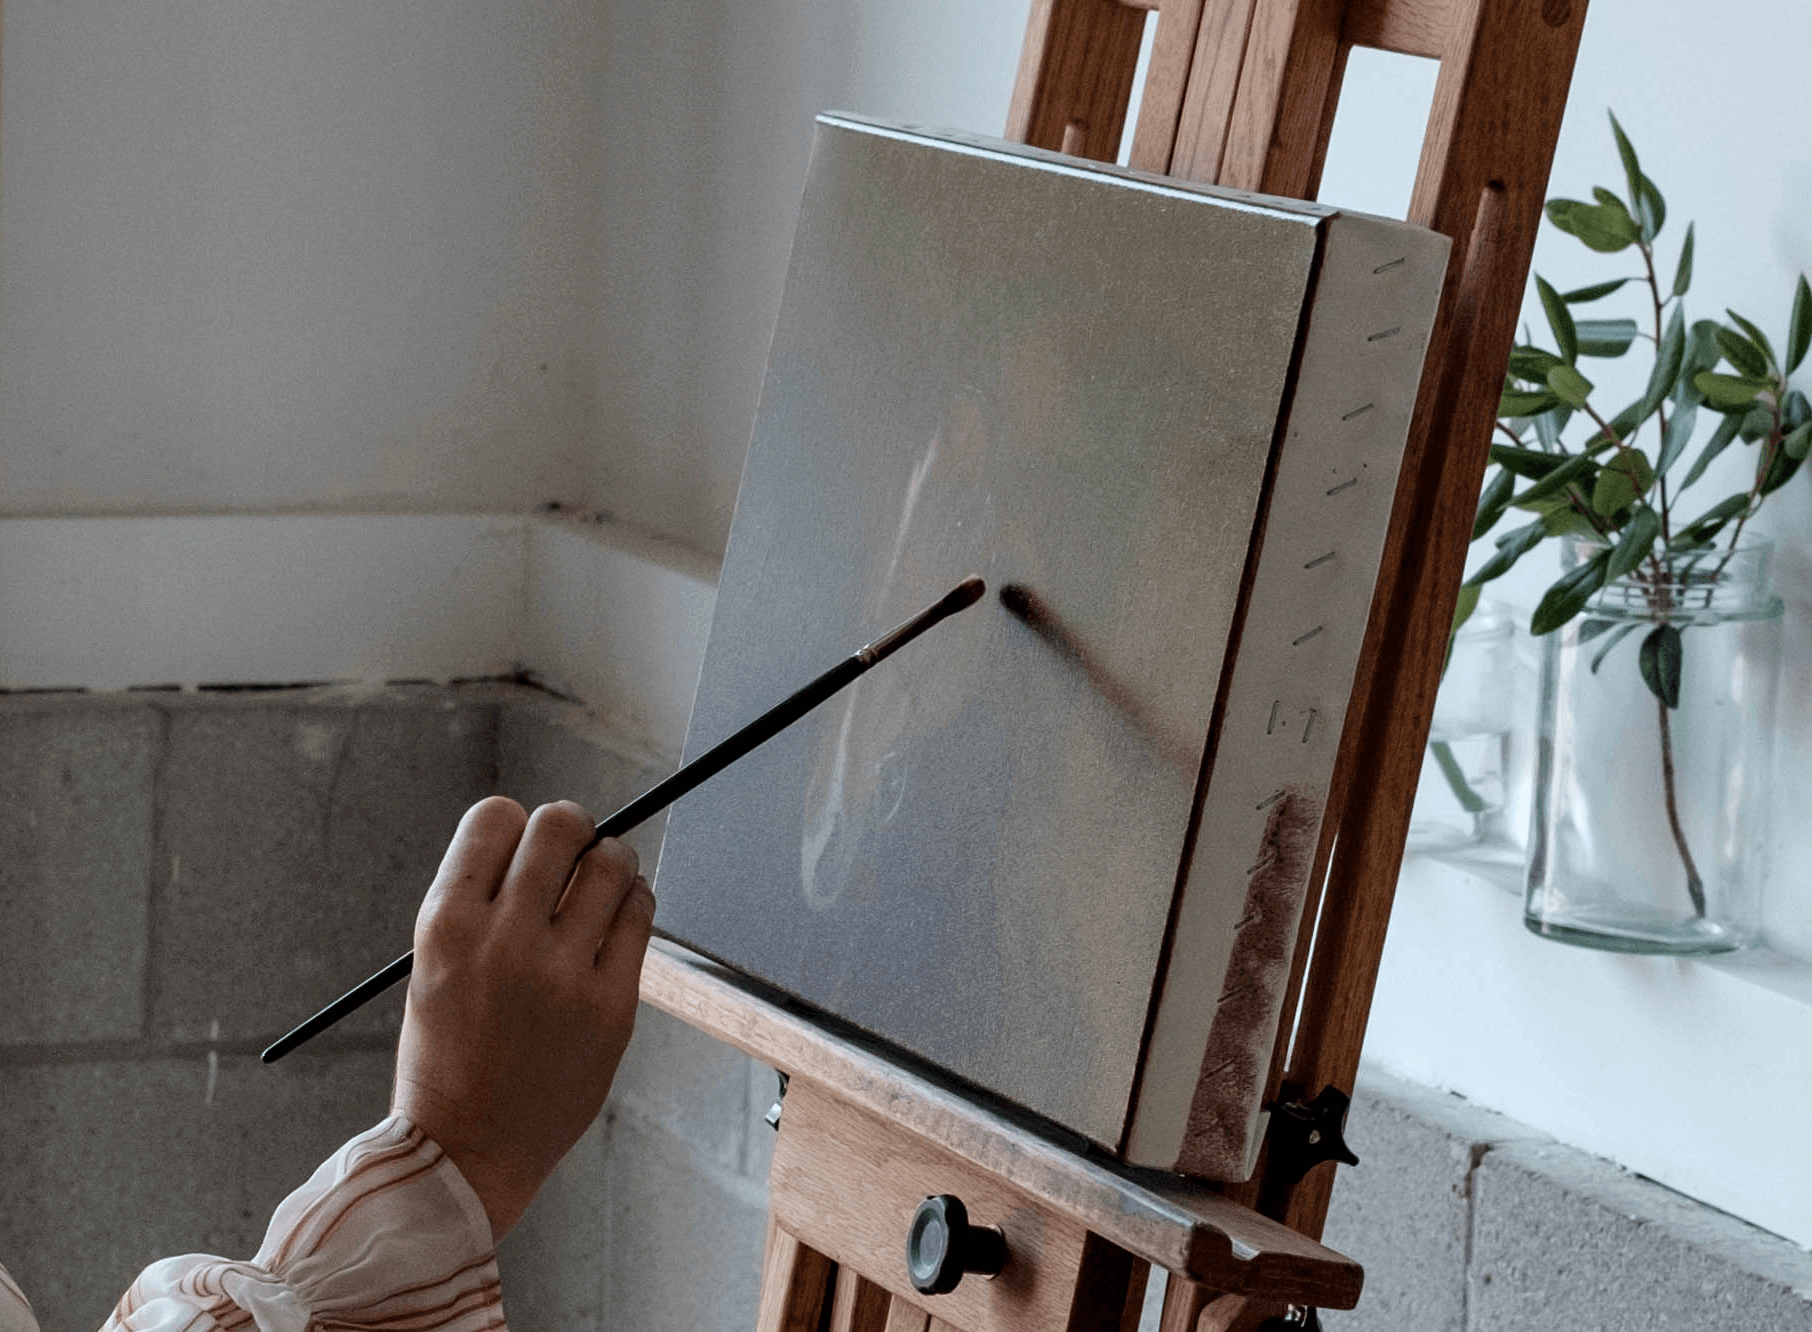 oil painting surfaces